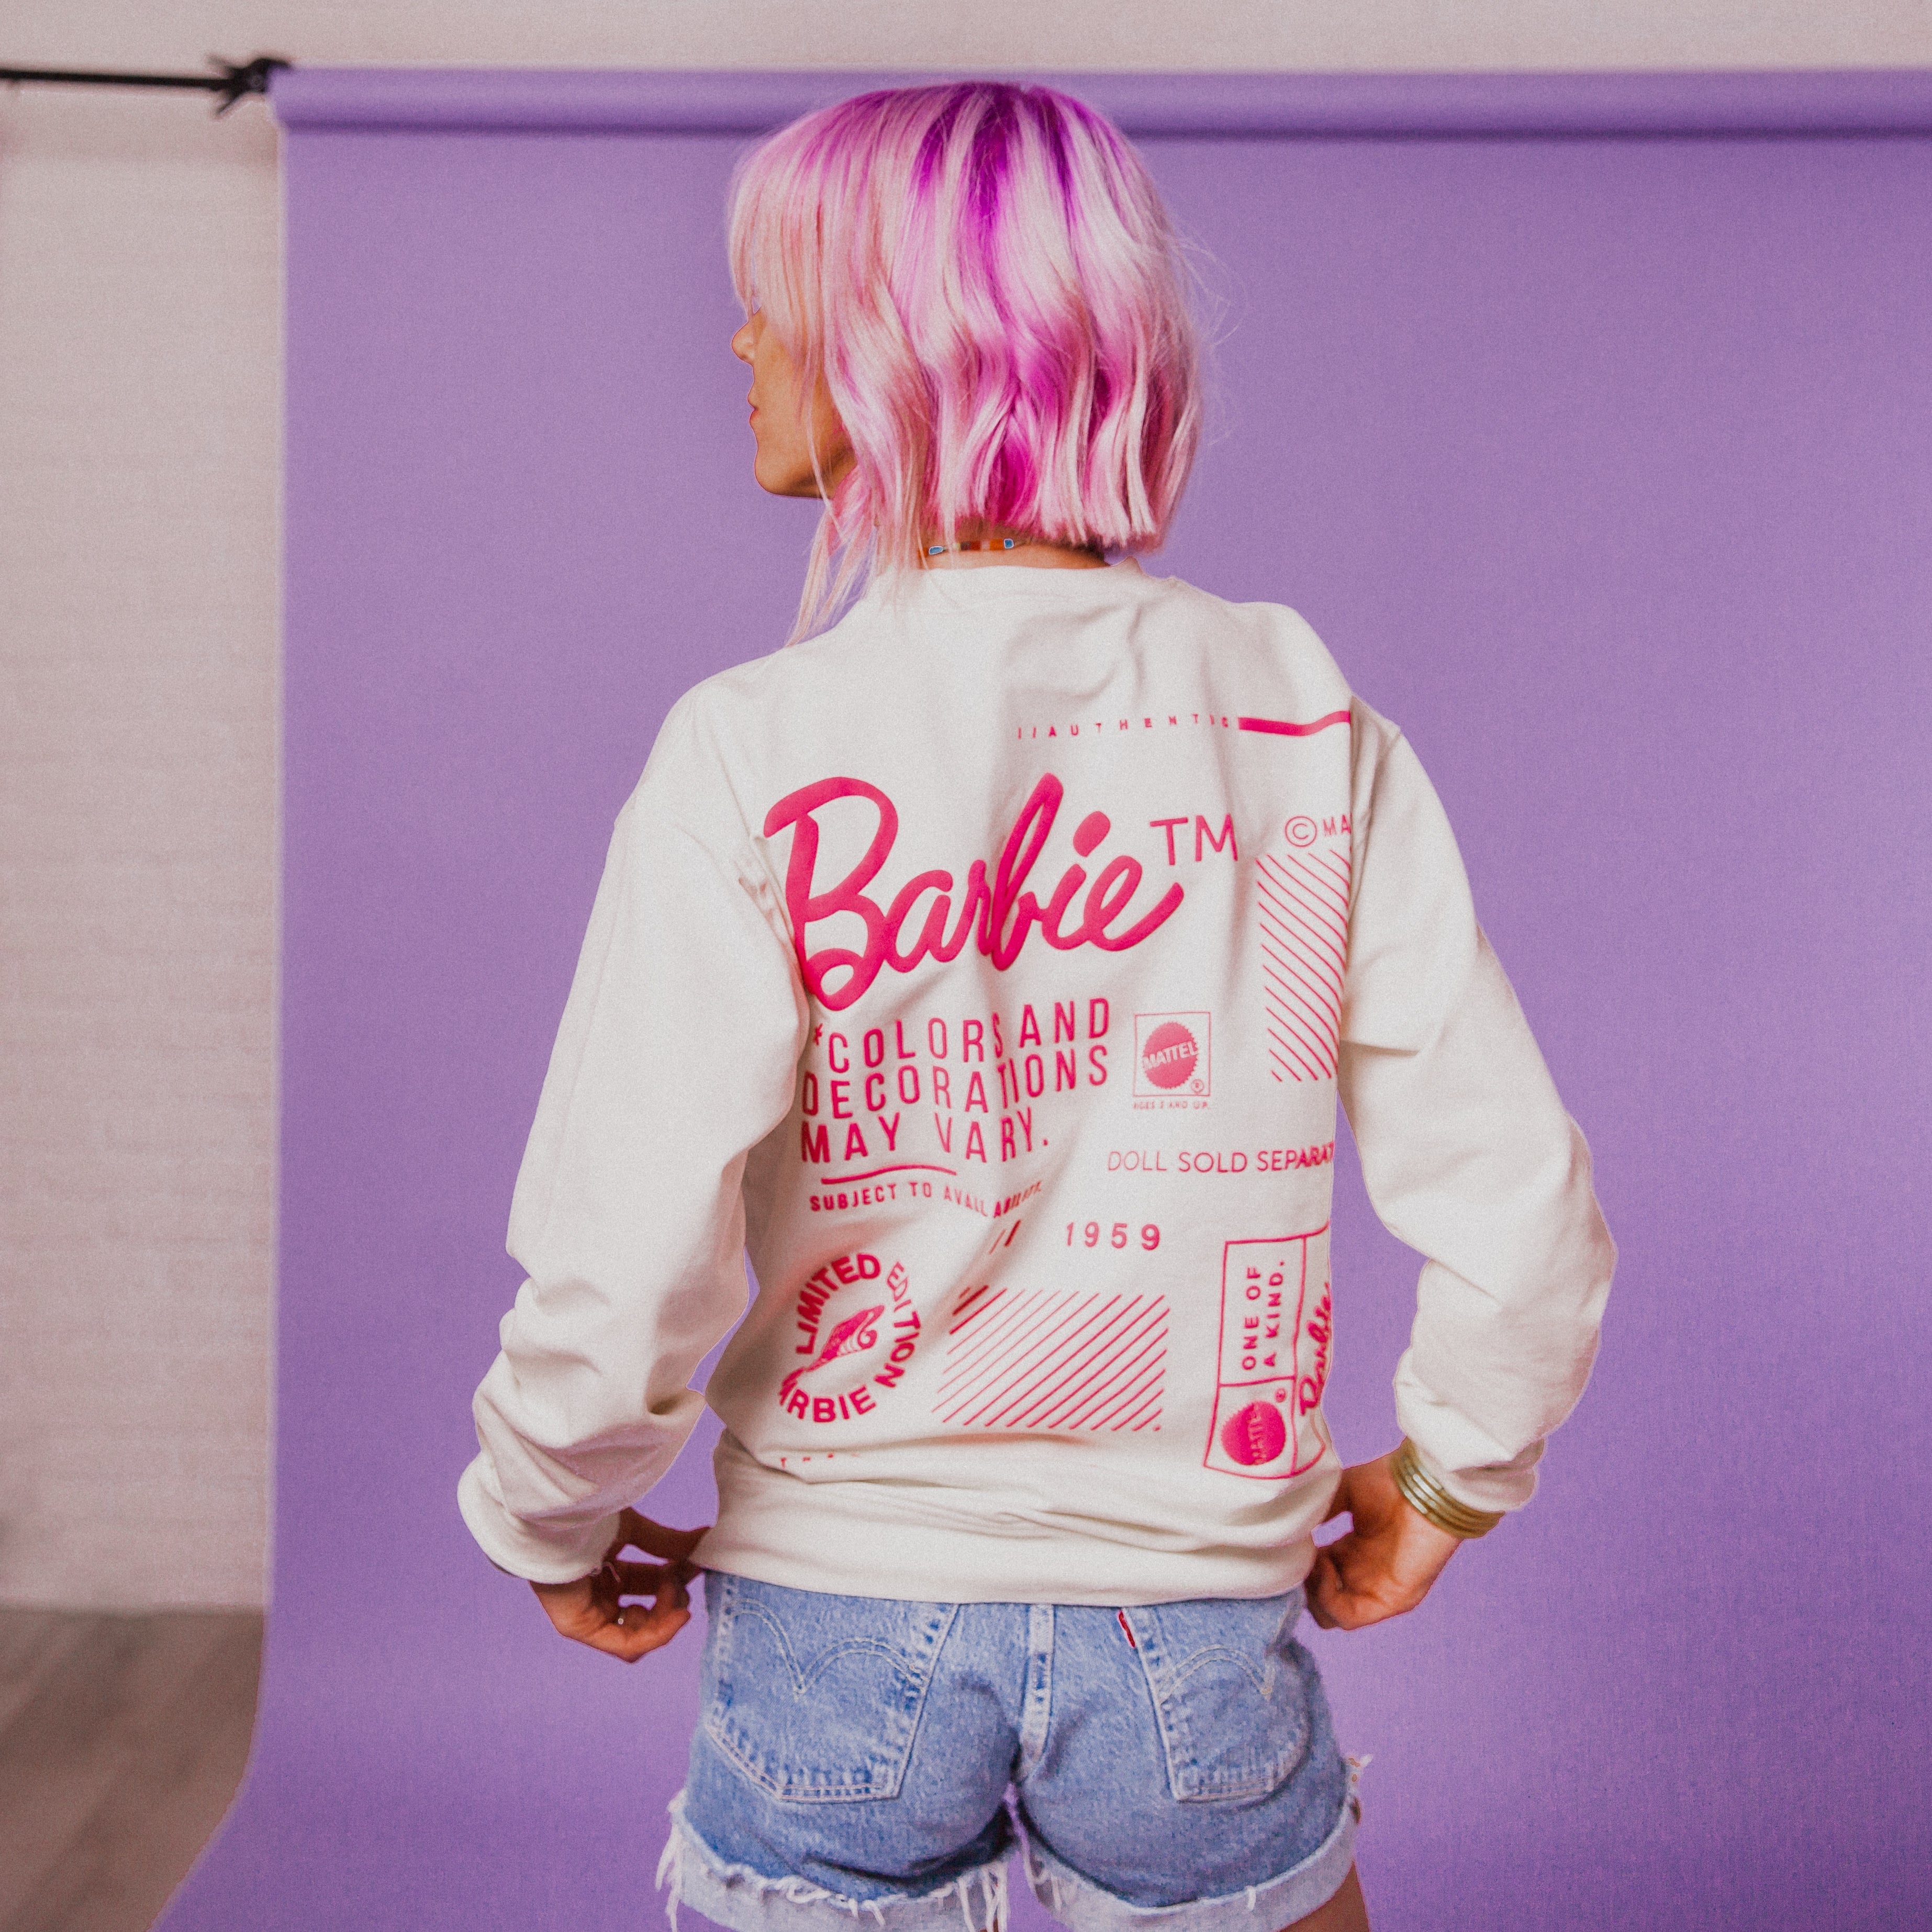 ***PREORDER*** Adult Unisex Sweatshirt Boxy Fit - Barbie PREORDER - Mattel Barbie Collection by RAGS